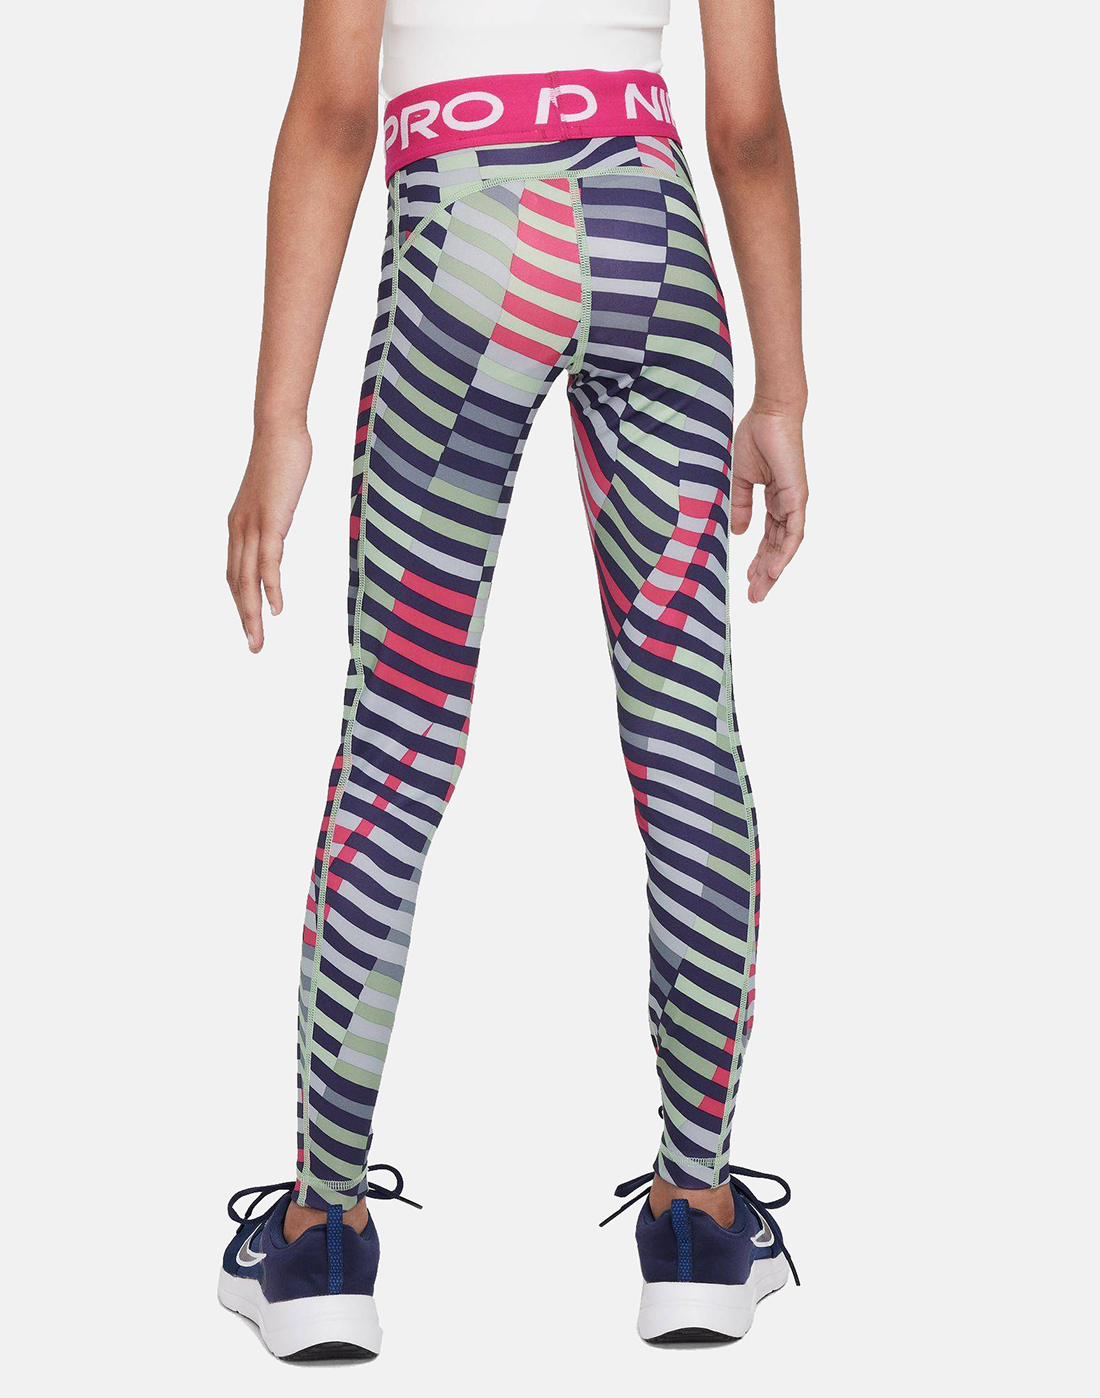 Nike Older Girls Dry-Fit AOP Leggings - Assorted | Life Style Sports IE